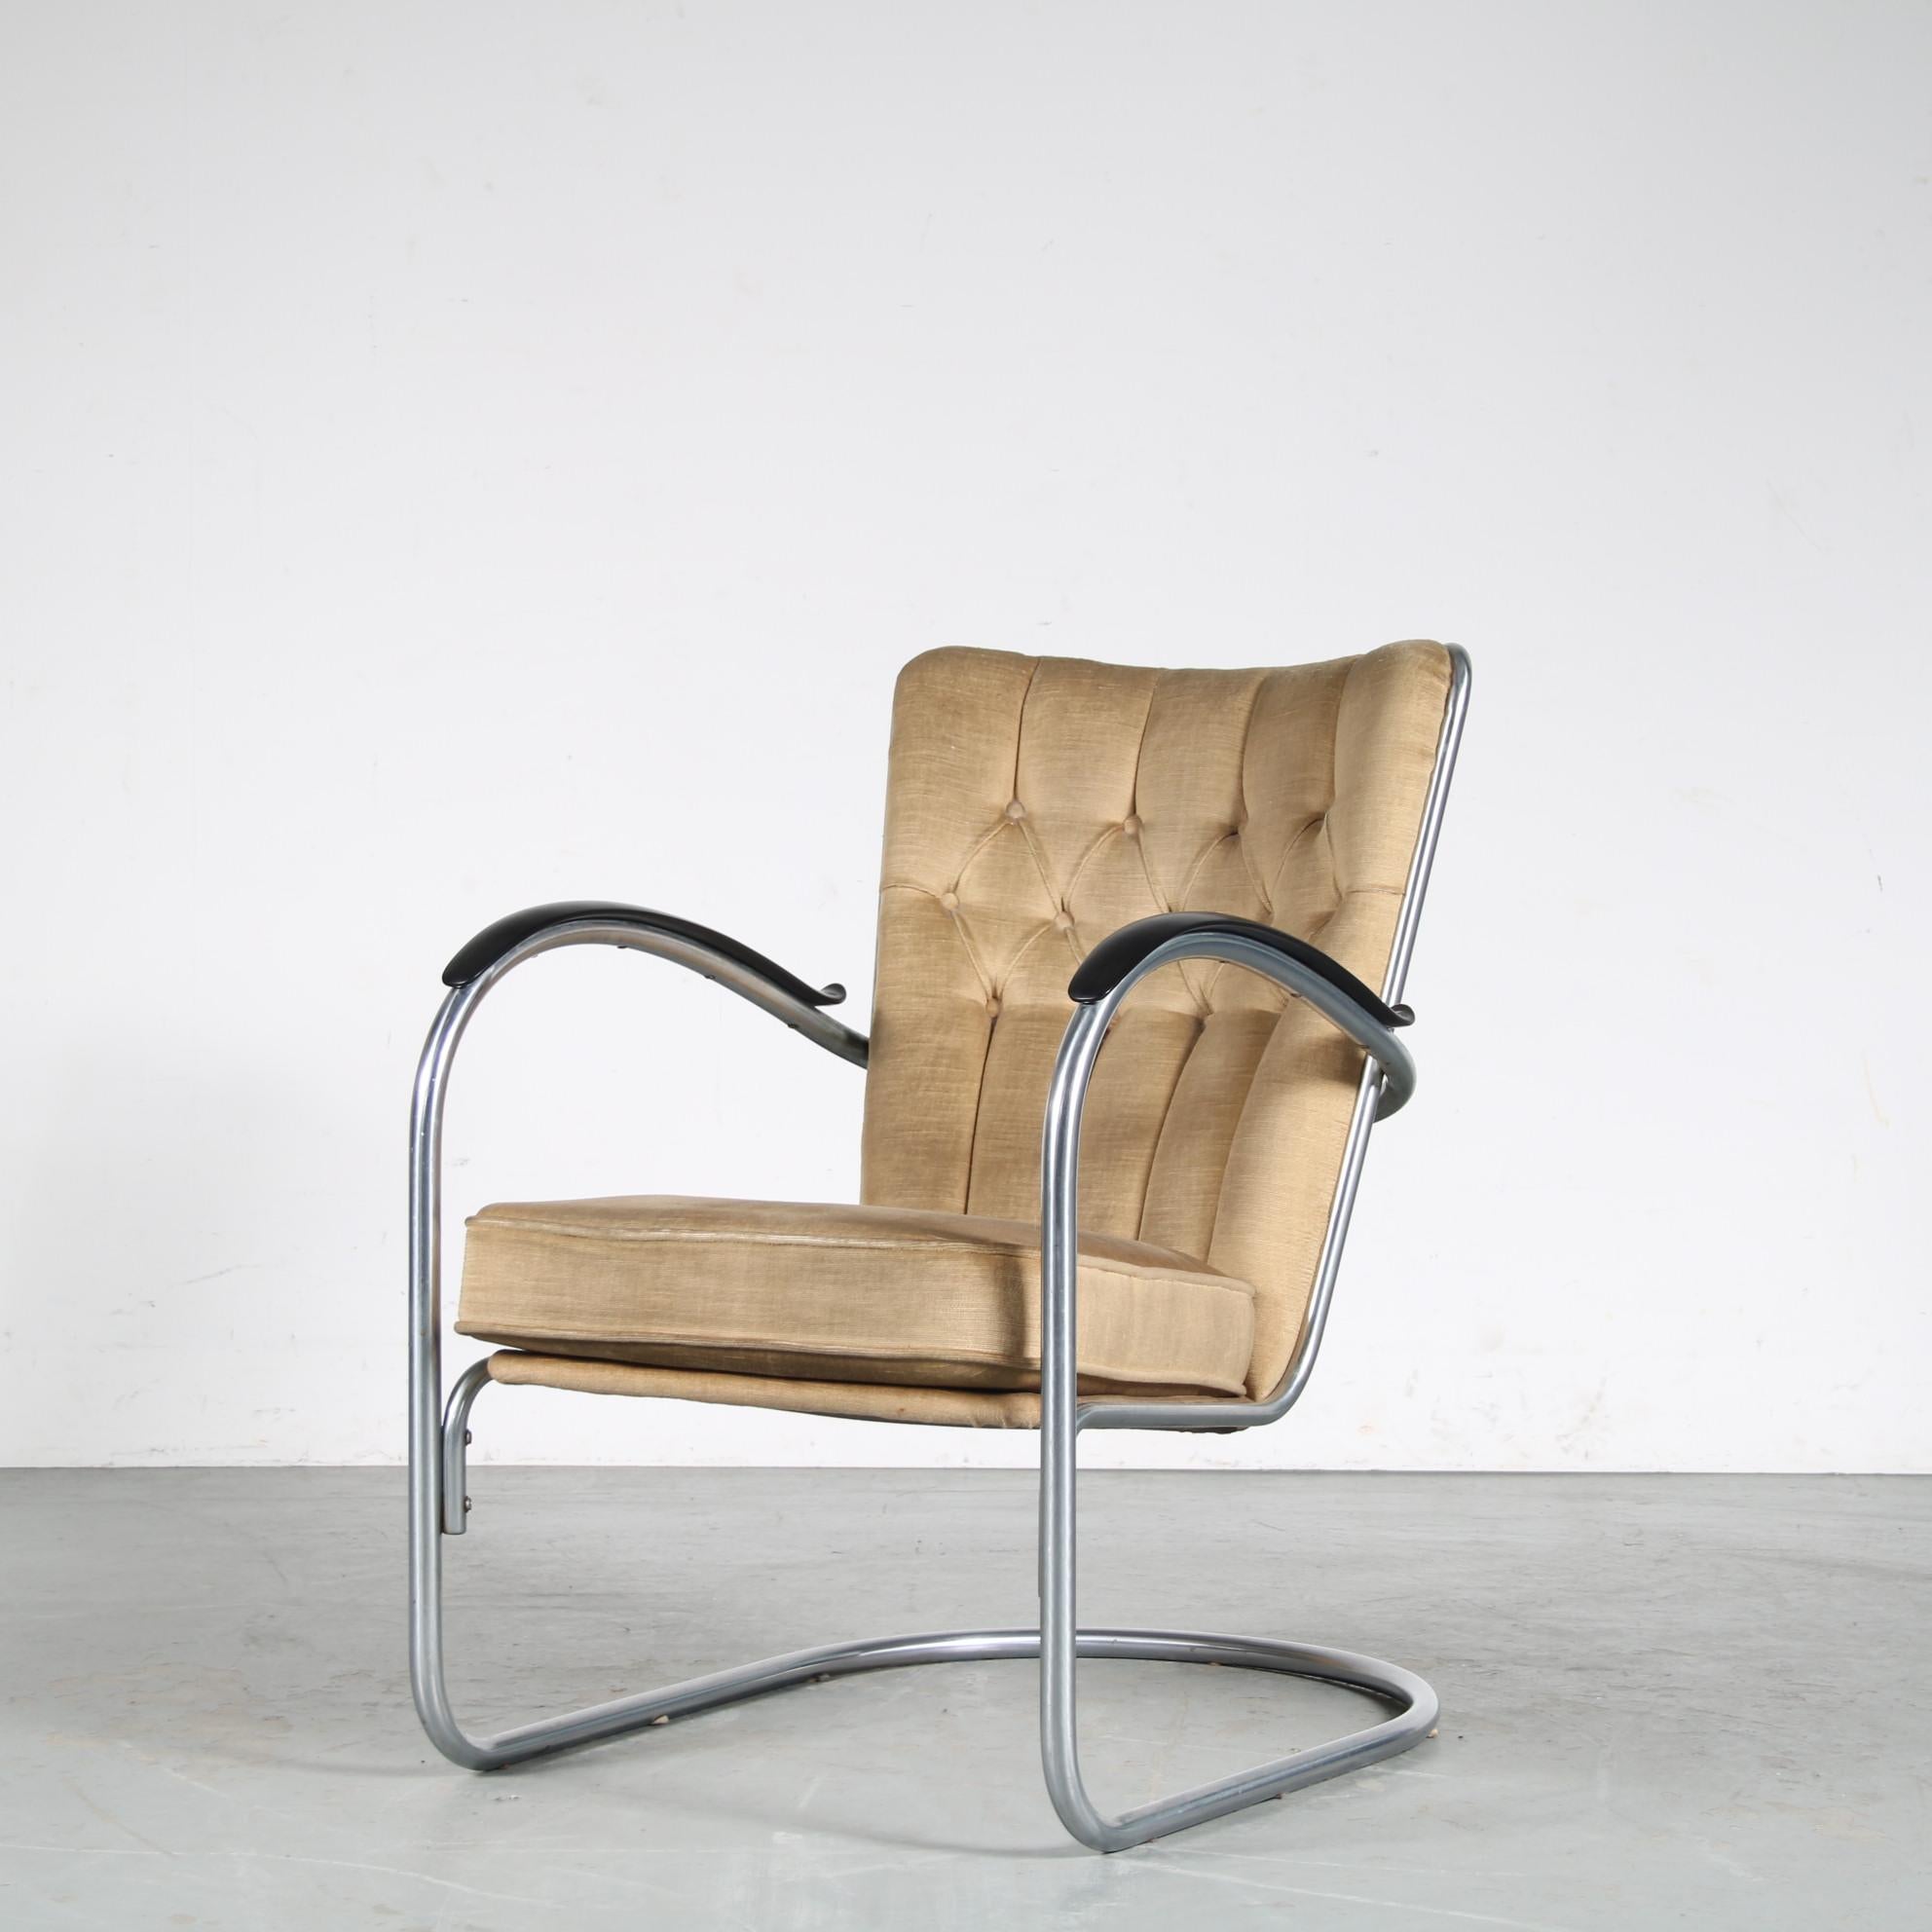 A lovely easy chair from the Netherlands, manufactured by Gispen and designed by W.H. Gispen around 1950.

This chair, model “412”, is an iconic Dutch design and highly recognizable Gispen piece. The chrome plated, tubular metal frame gives it a